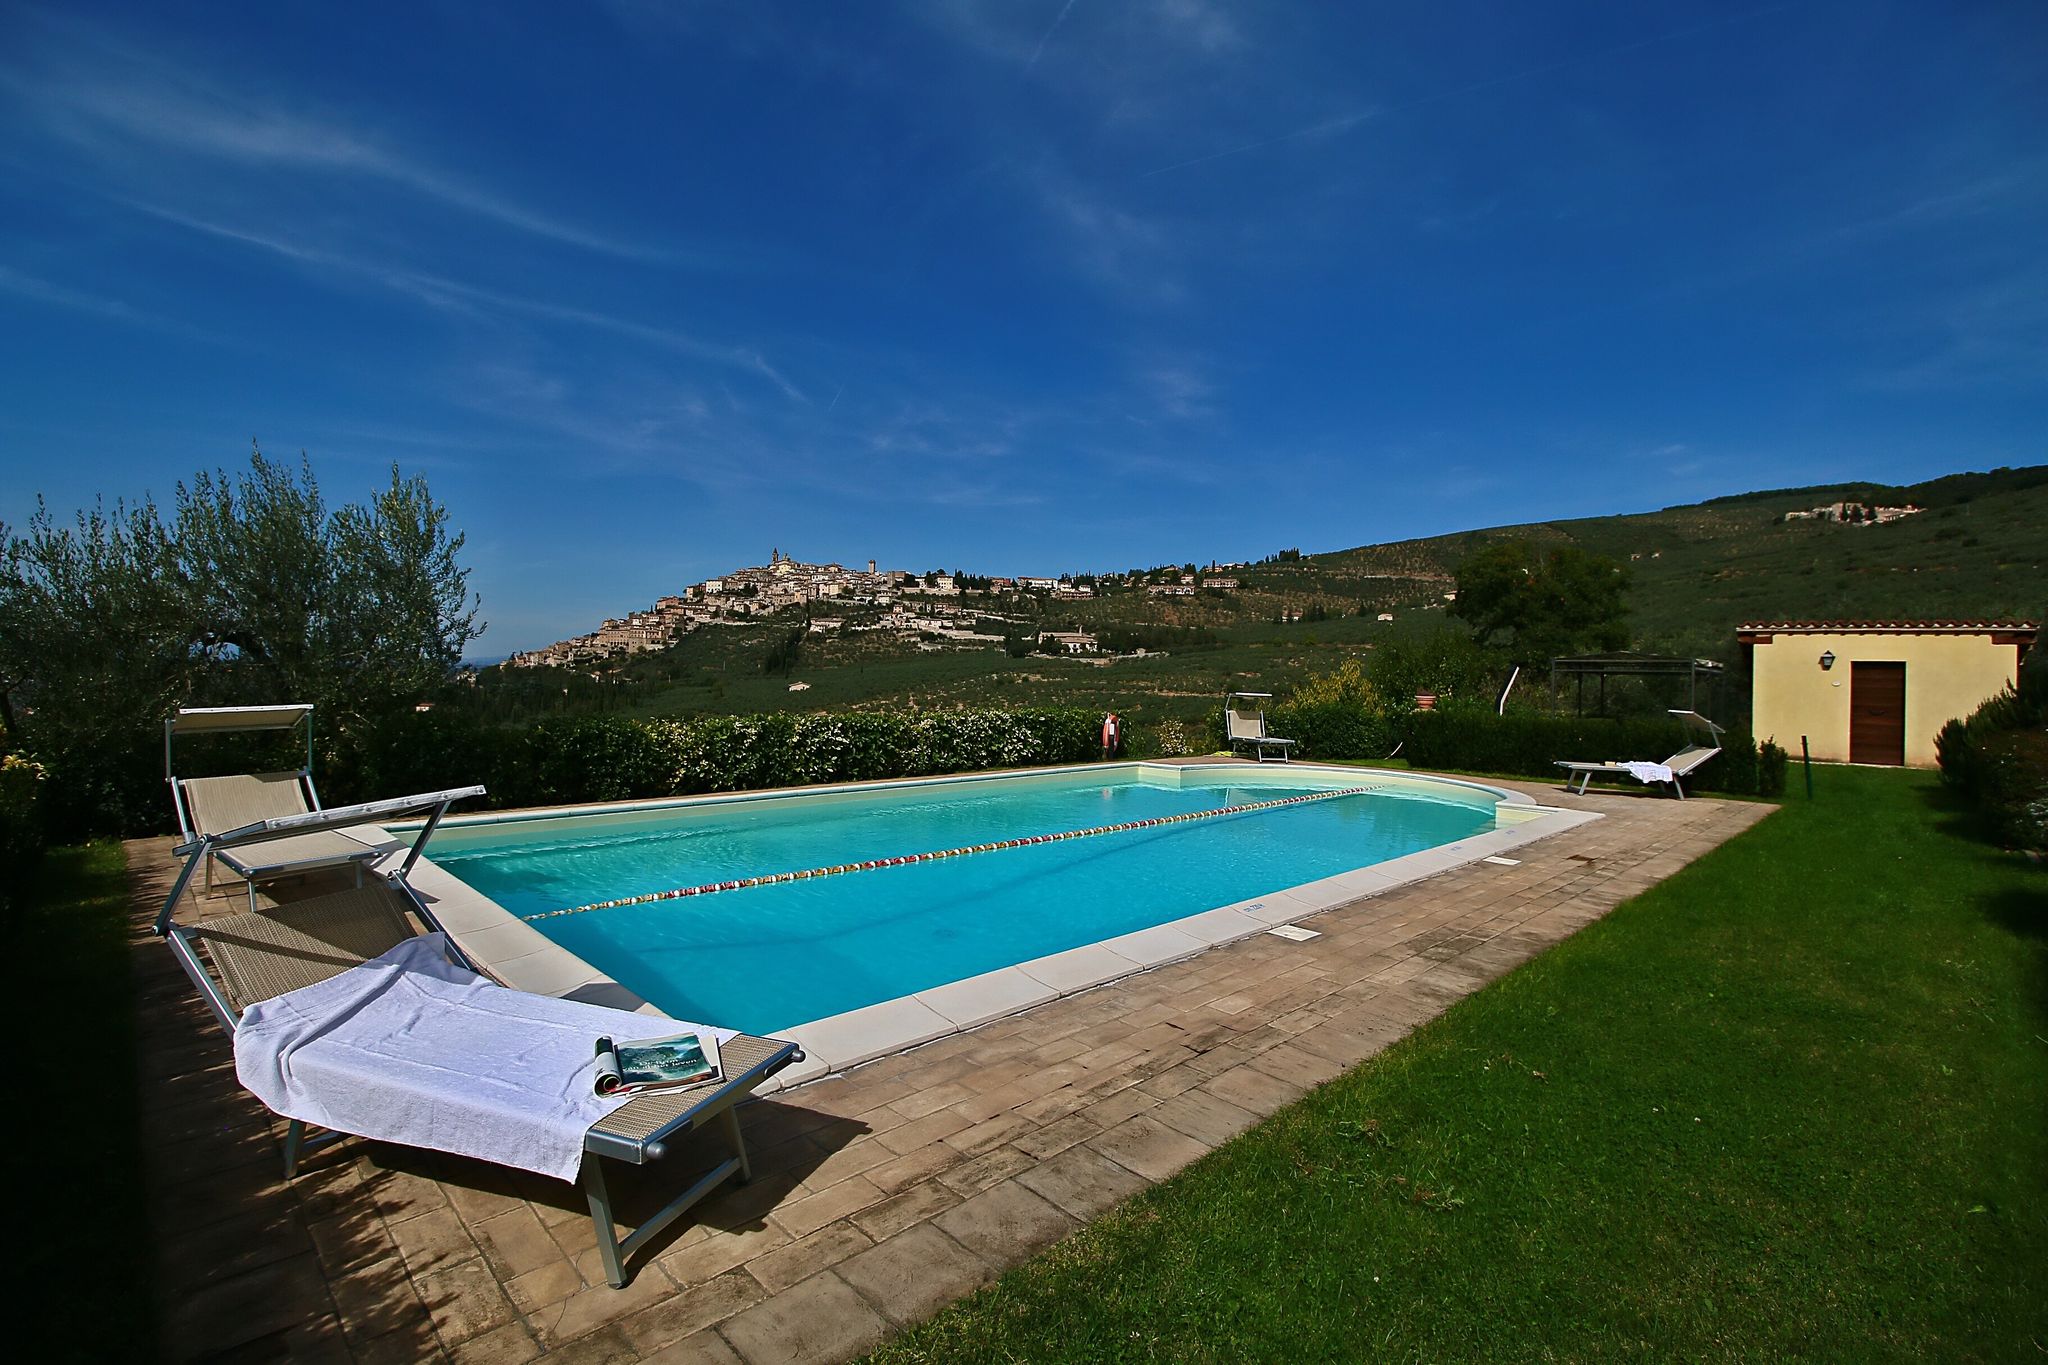 Agriturismo in the hills, private terrace, swimming pool and beautiful view